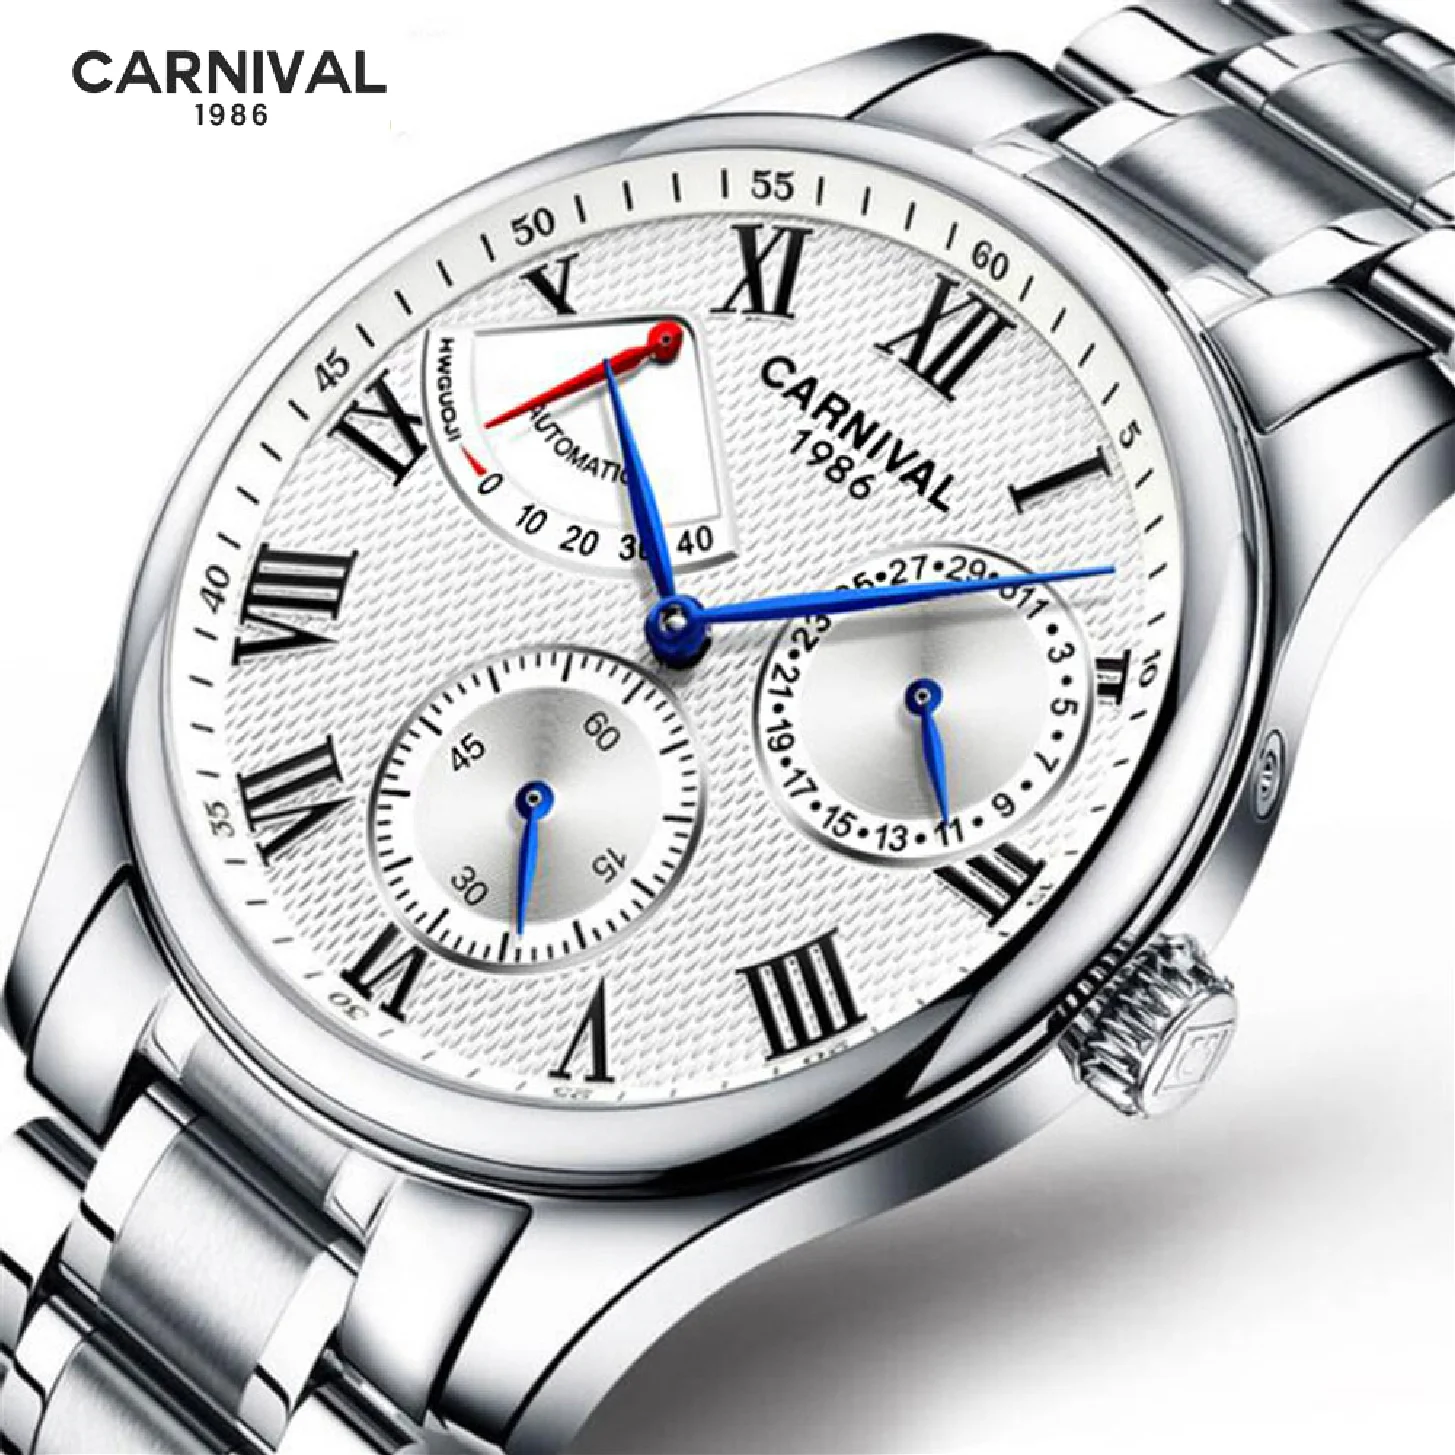 

Automatic Mechanical Watch CARNIVAL Fashion Stainless Steel Sport Man Luxury Brand Watch Kinetic Energy Display